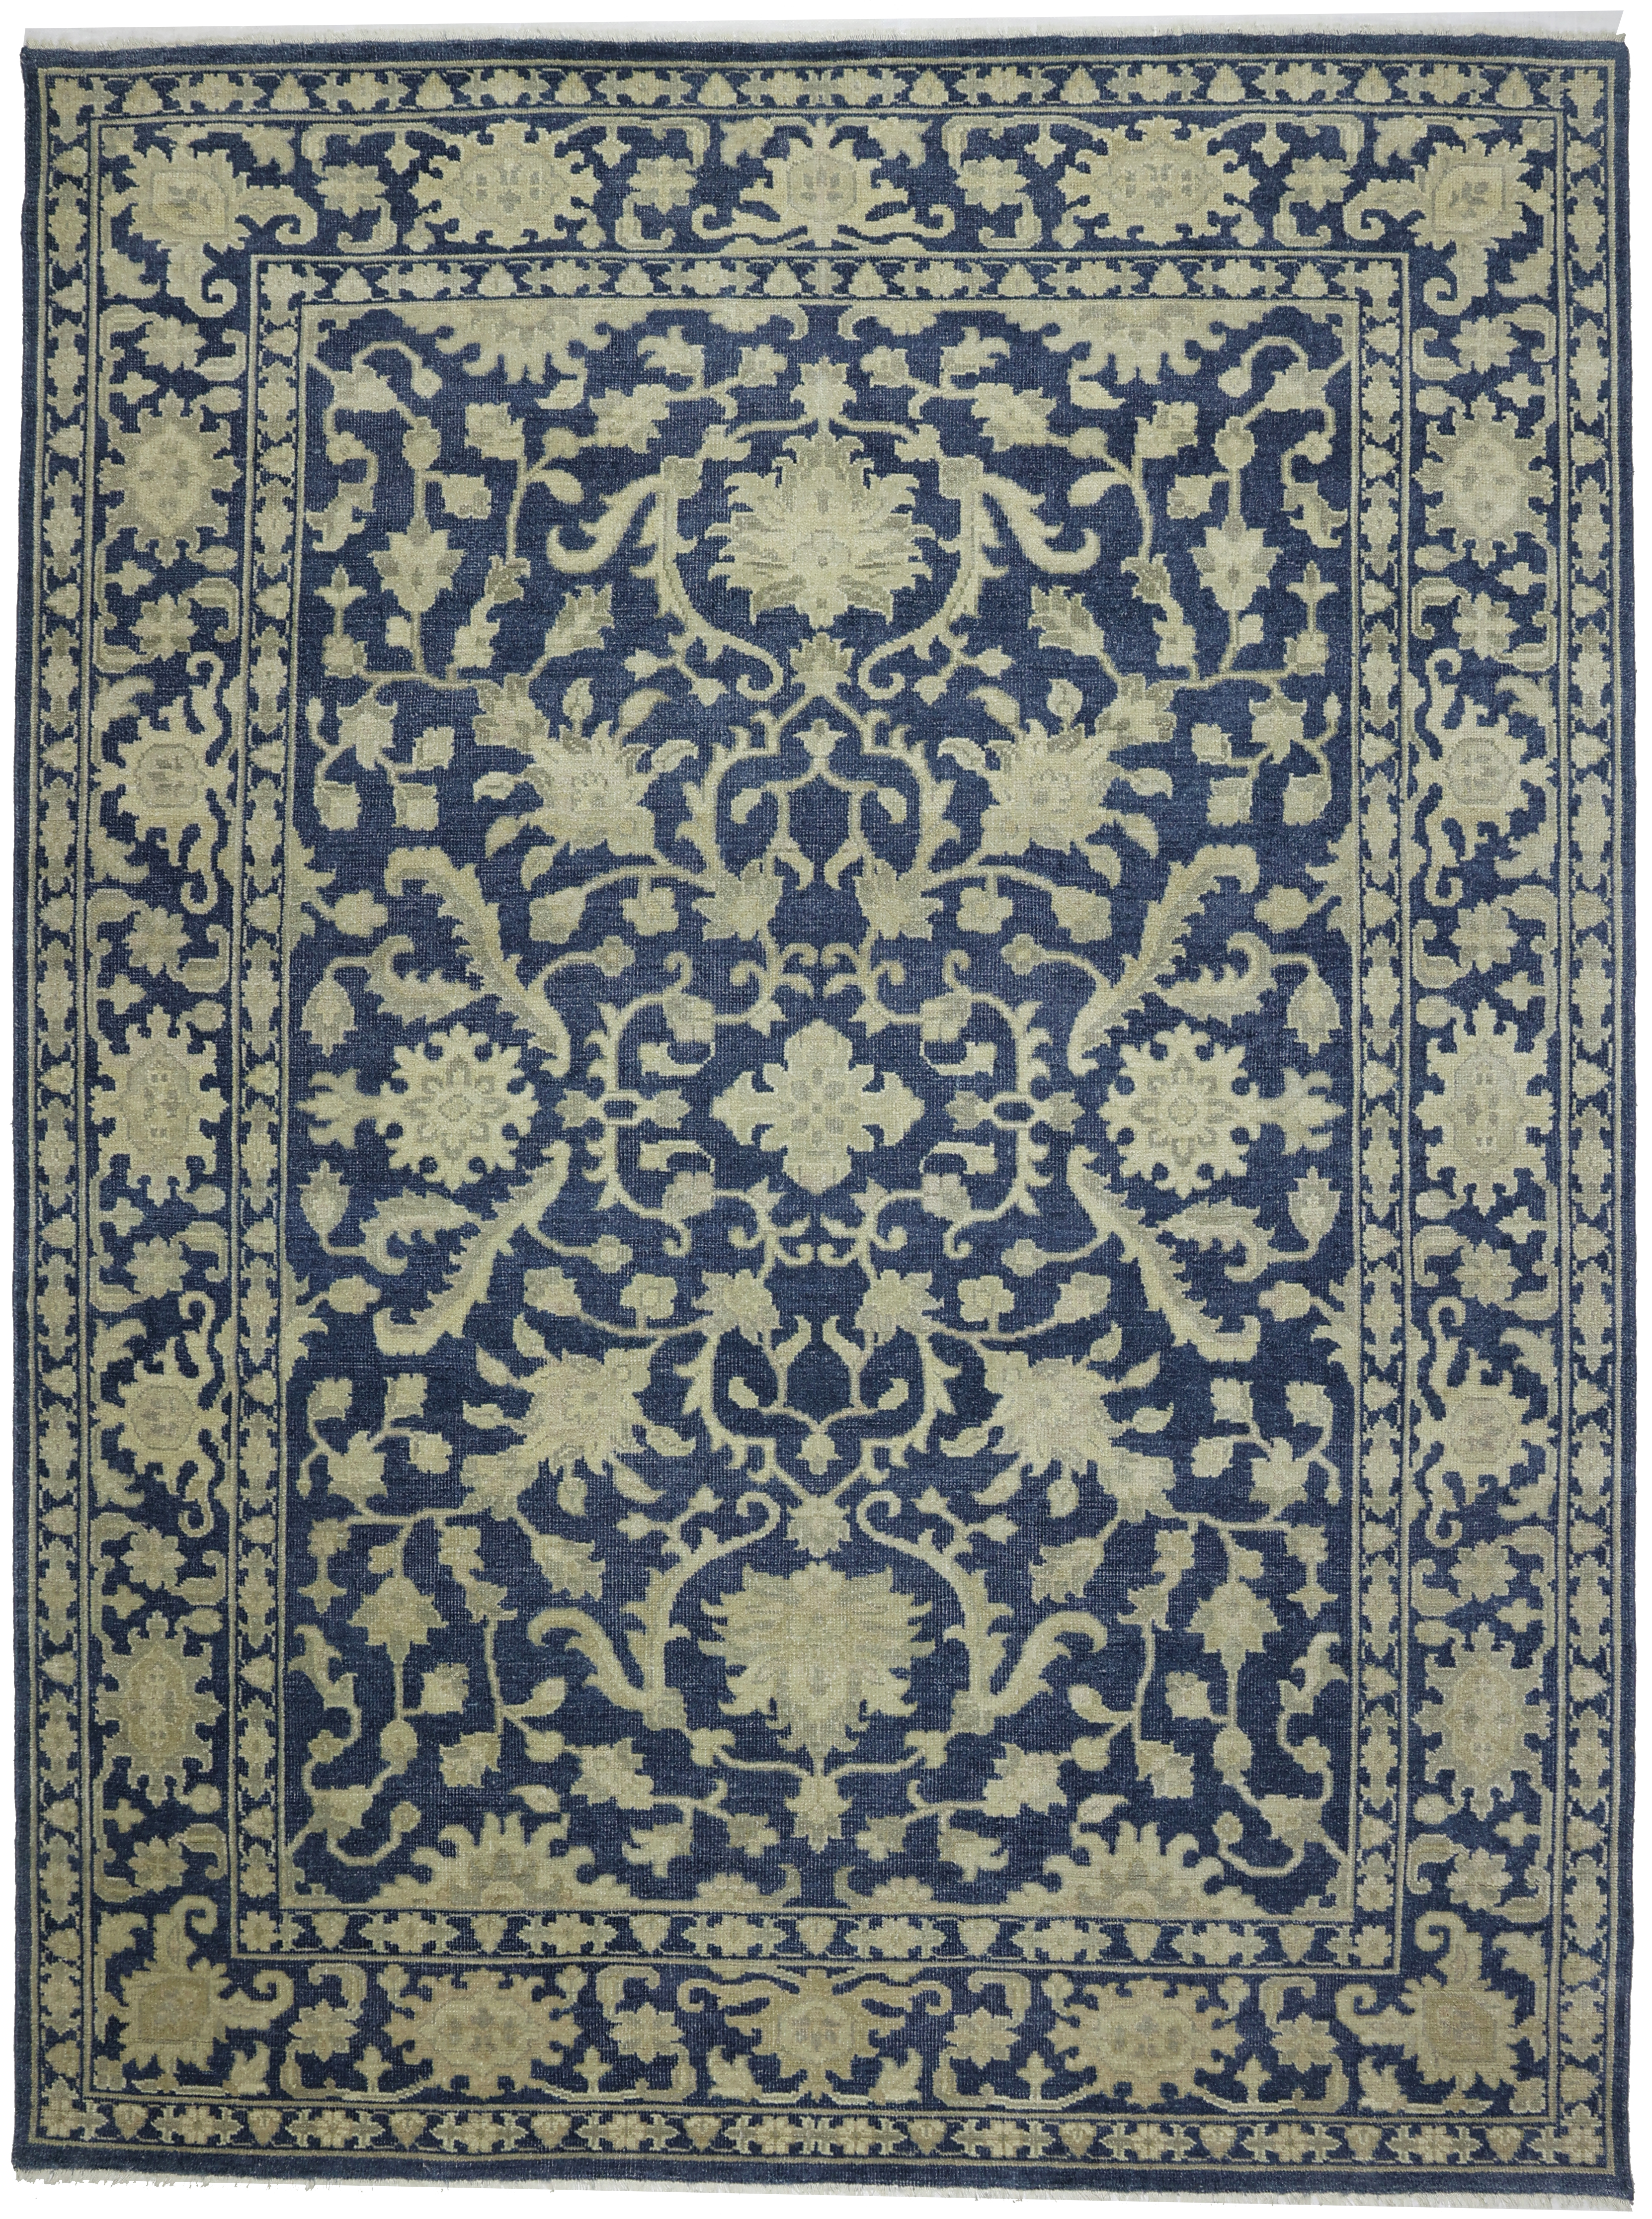 Muted Slate Blue Floral 9X12 Transitional Oriental Rug